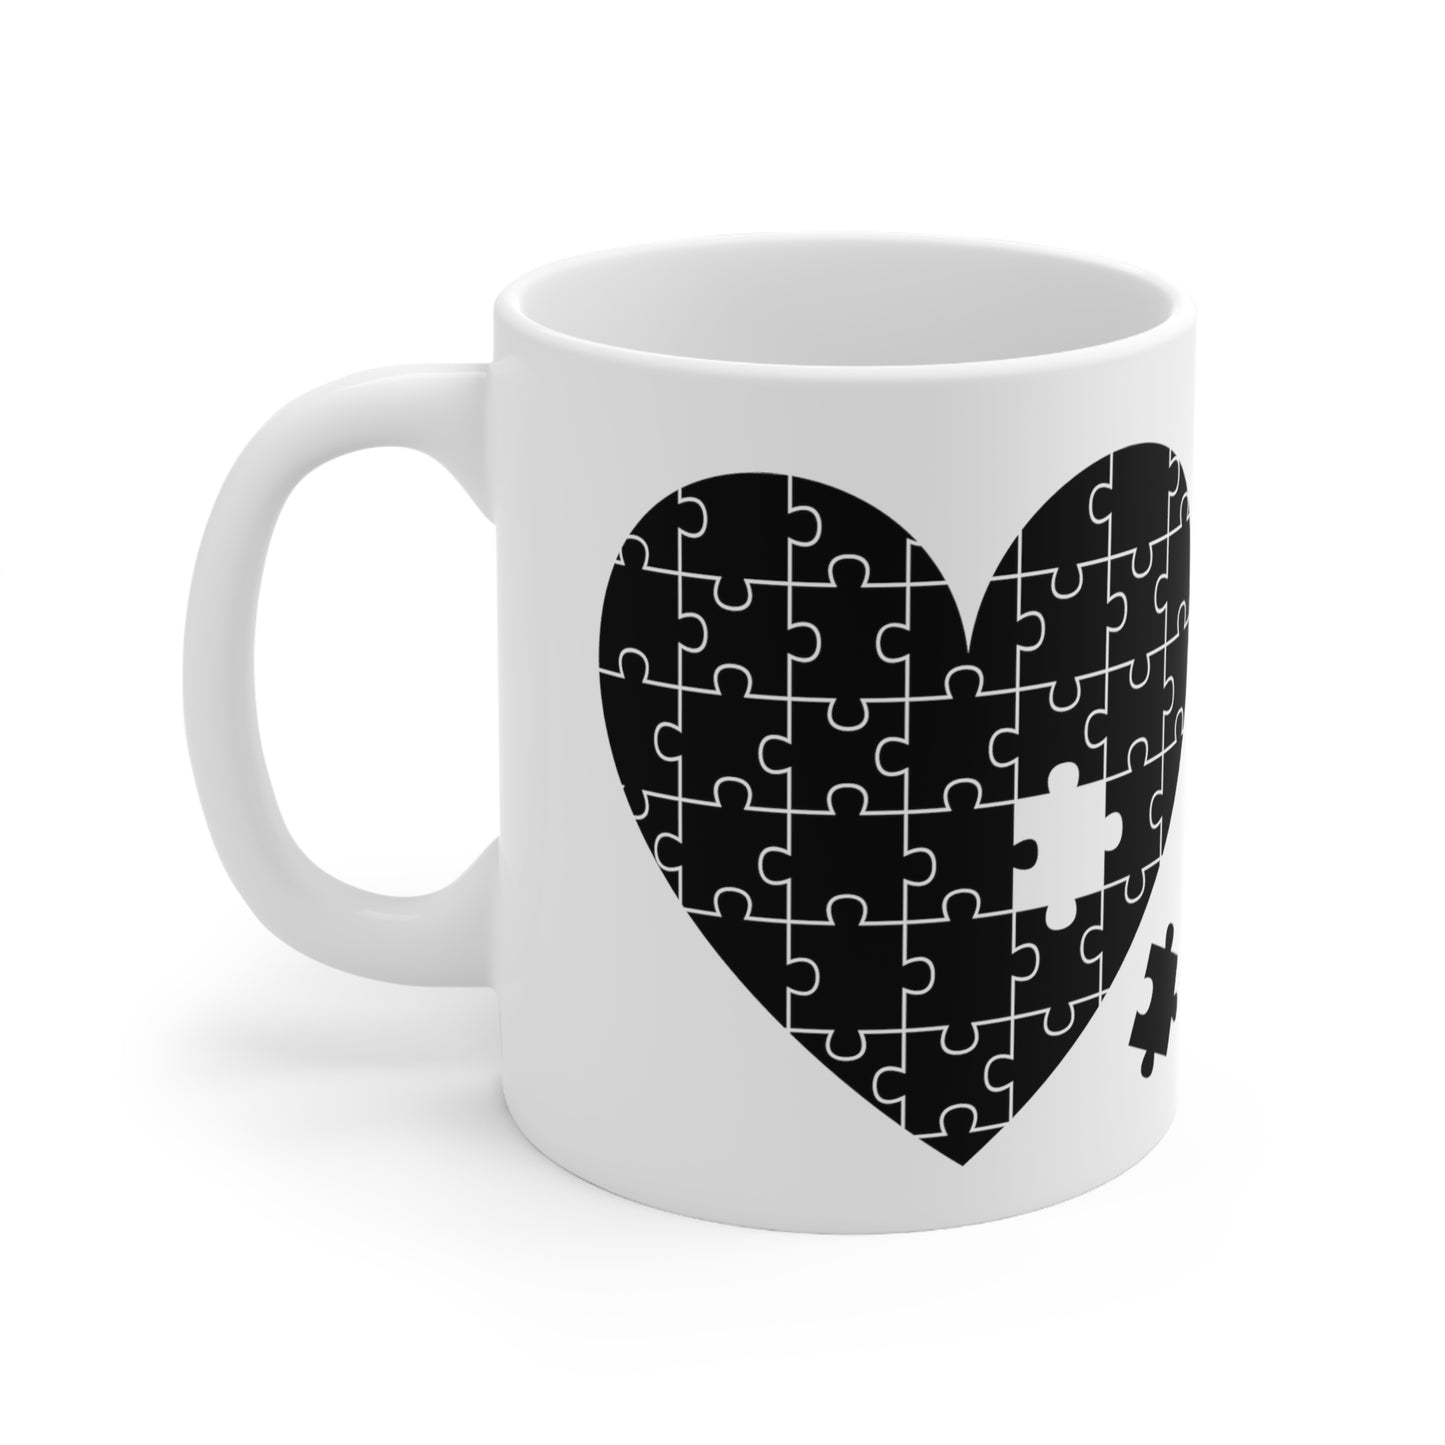 You Own The Missing Piece of My Heart Ceramic Mug 11oz